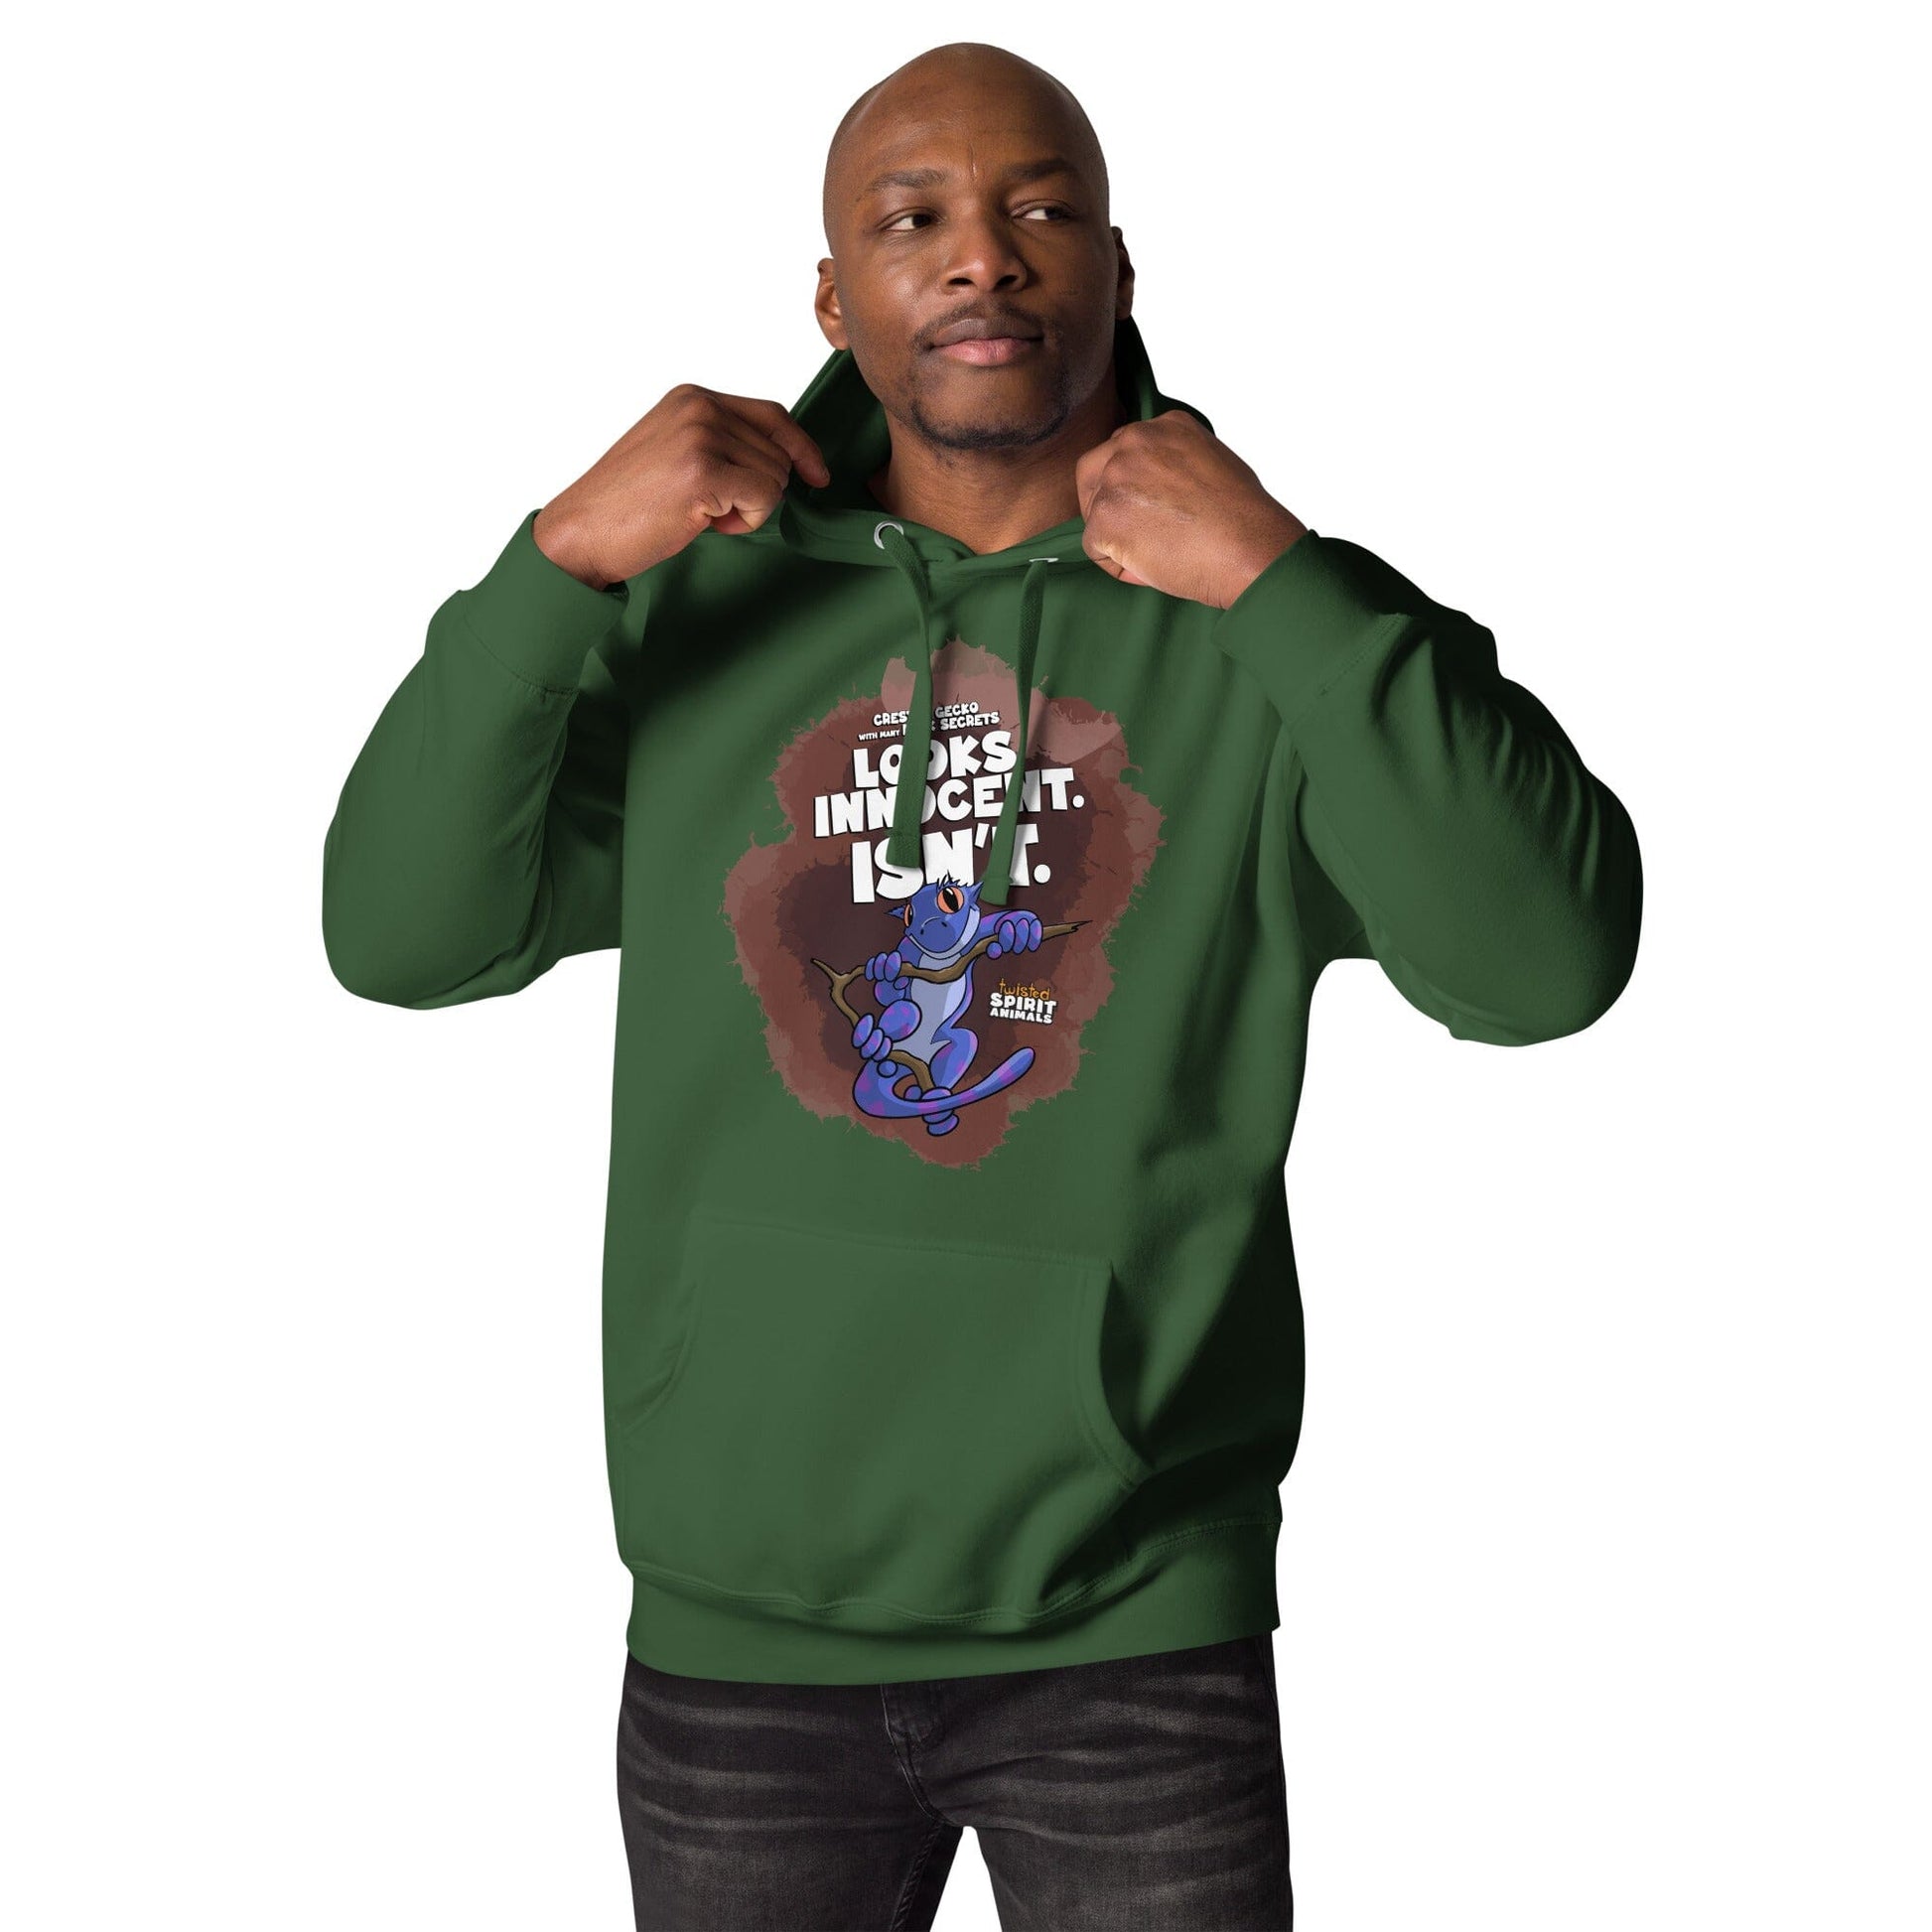 Crested Gecko with many Dark Secrets Unisex Hoodie hoodie Danger Bear Industries Forest Green S 